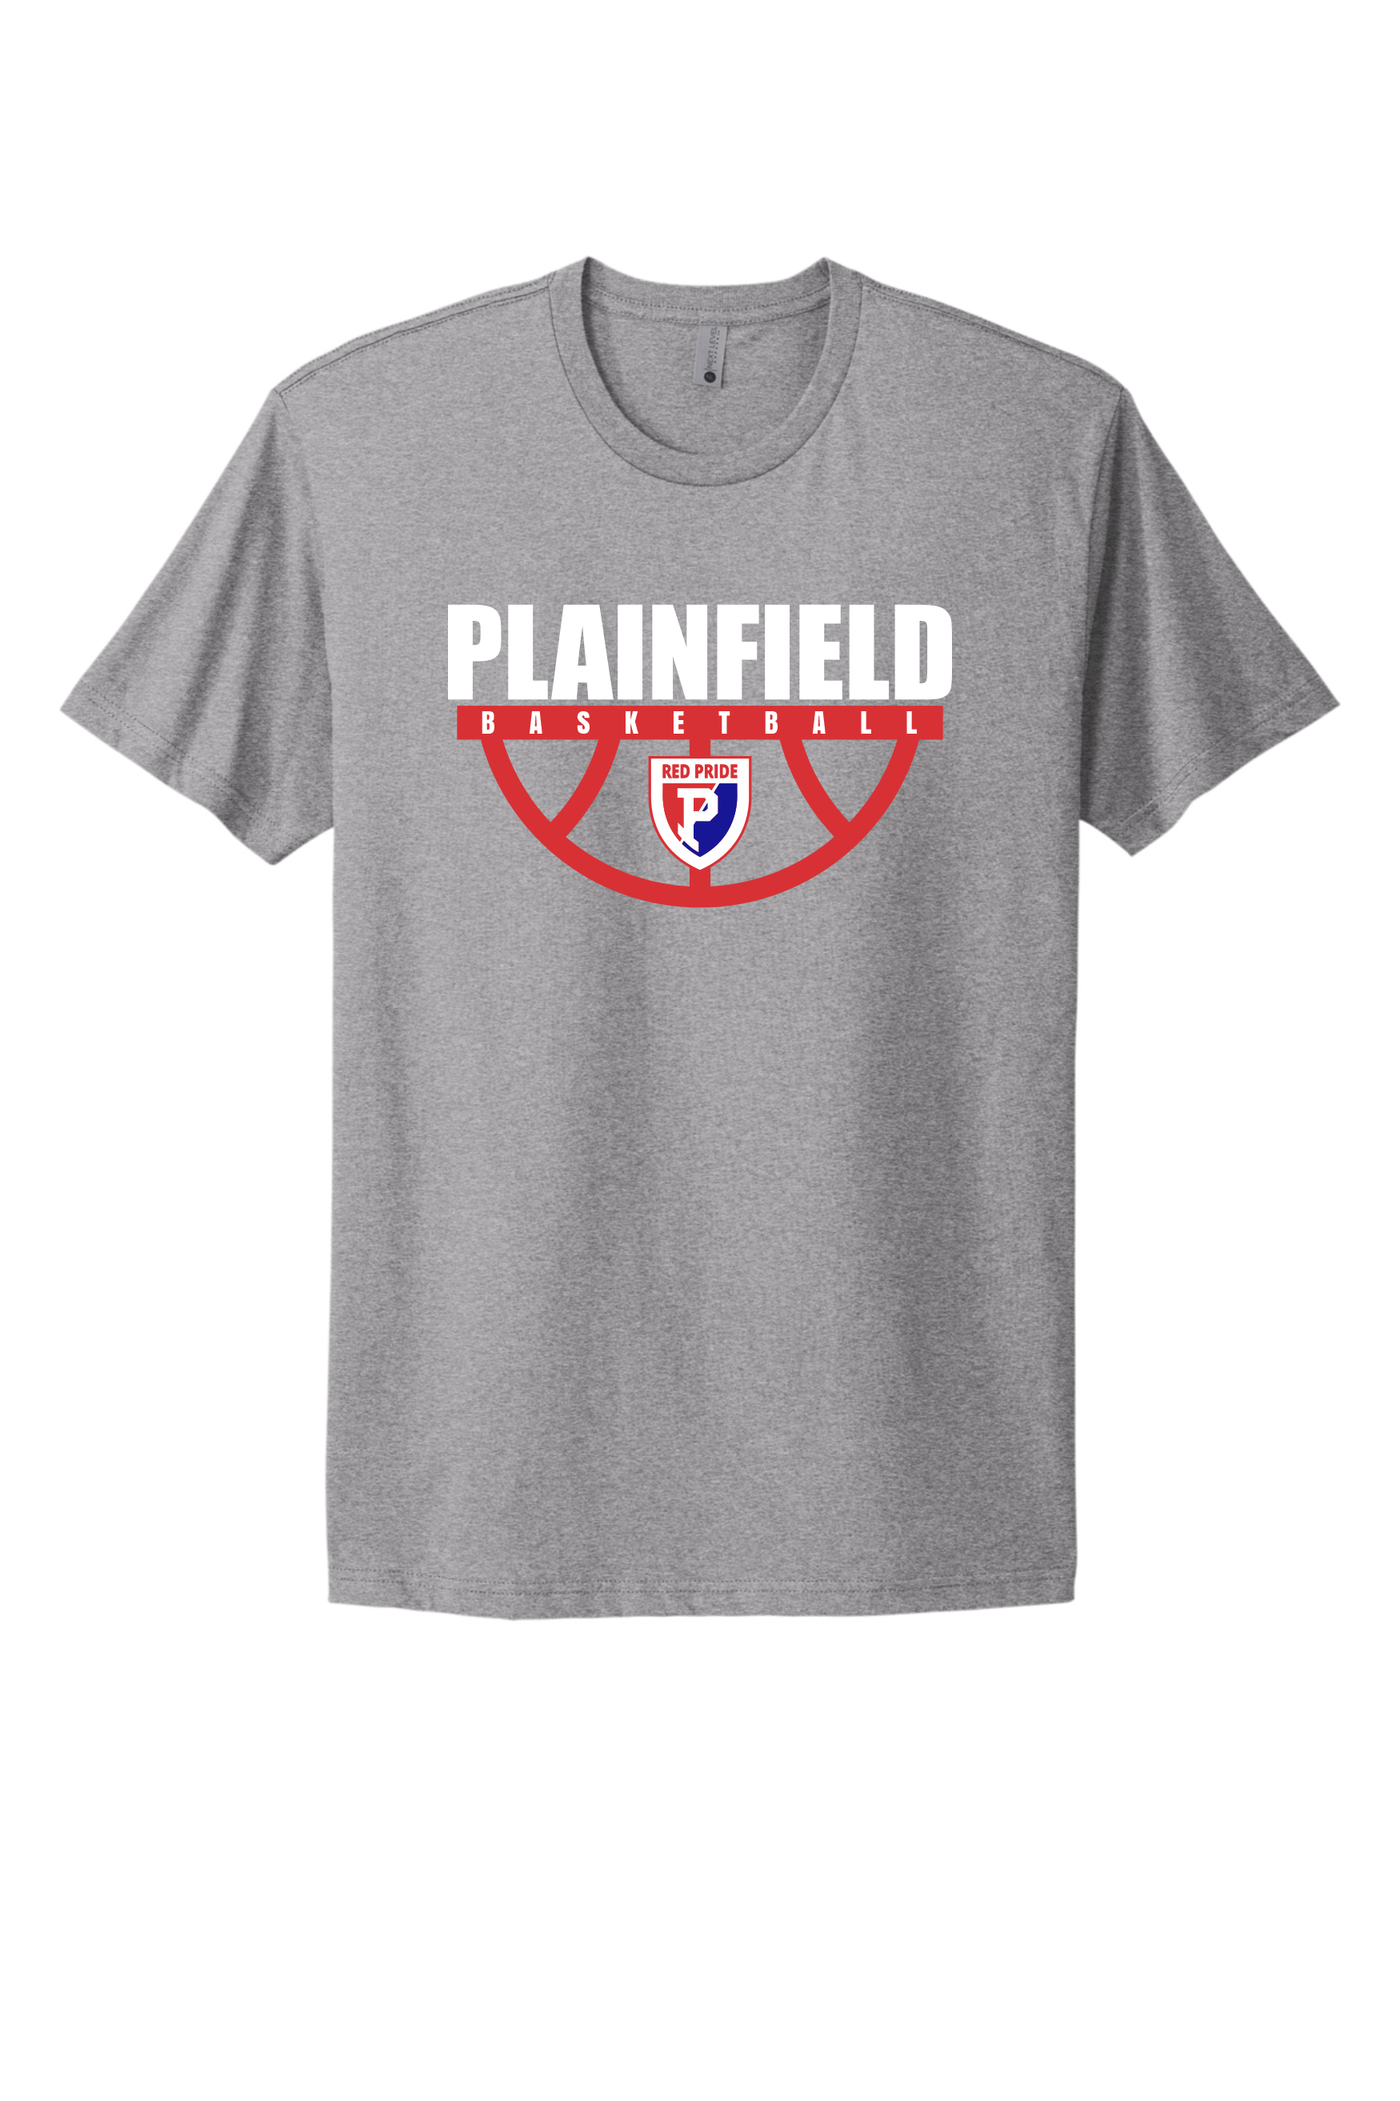 Plainfield Cotton Tee - T1 YOUTH - Y&S Designs, LLC